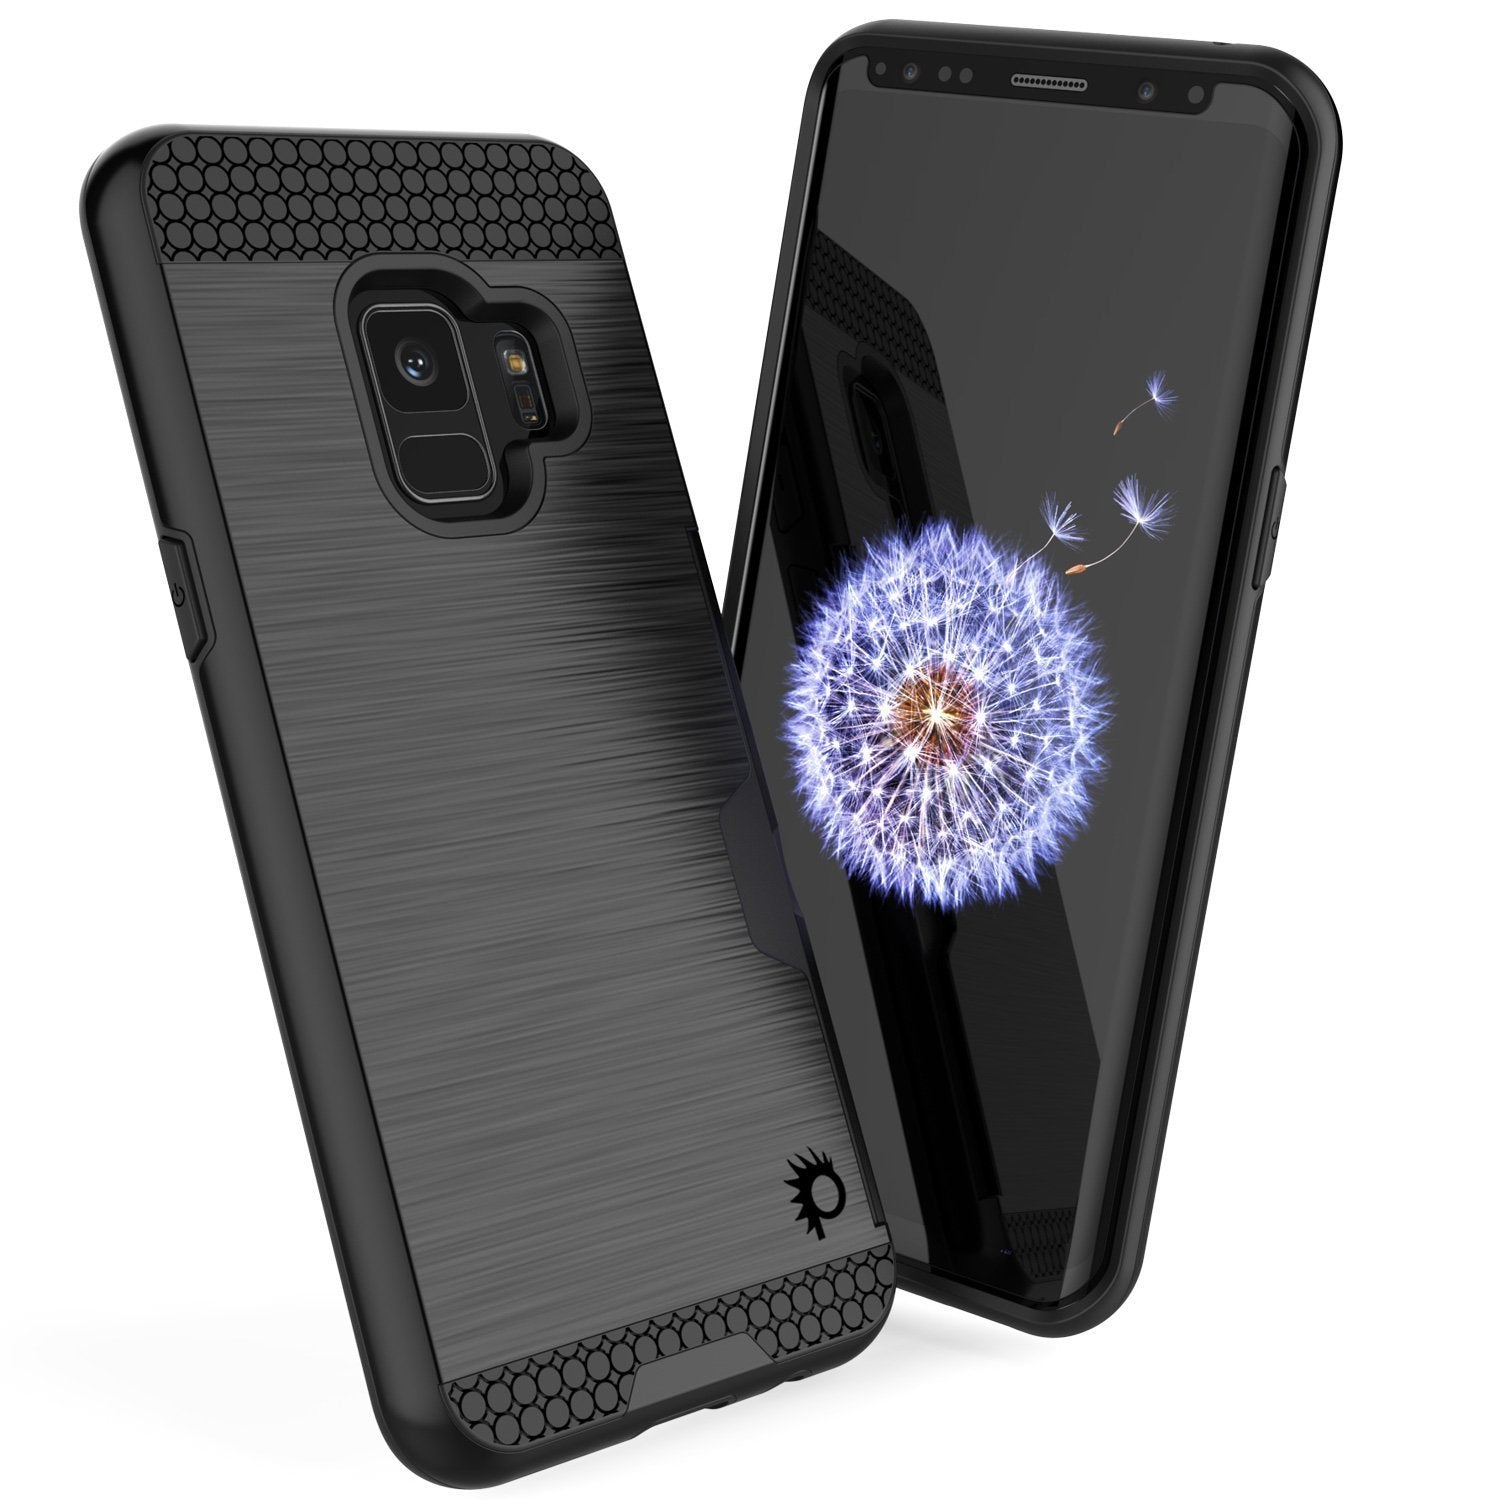 Galaxy S9 case, Punkcase SLOT Series Dual-Layer Cover [Black]